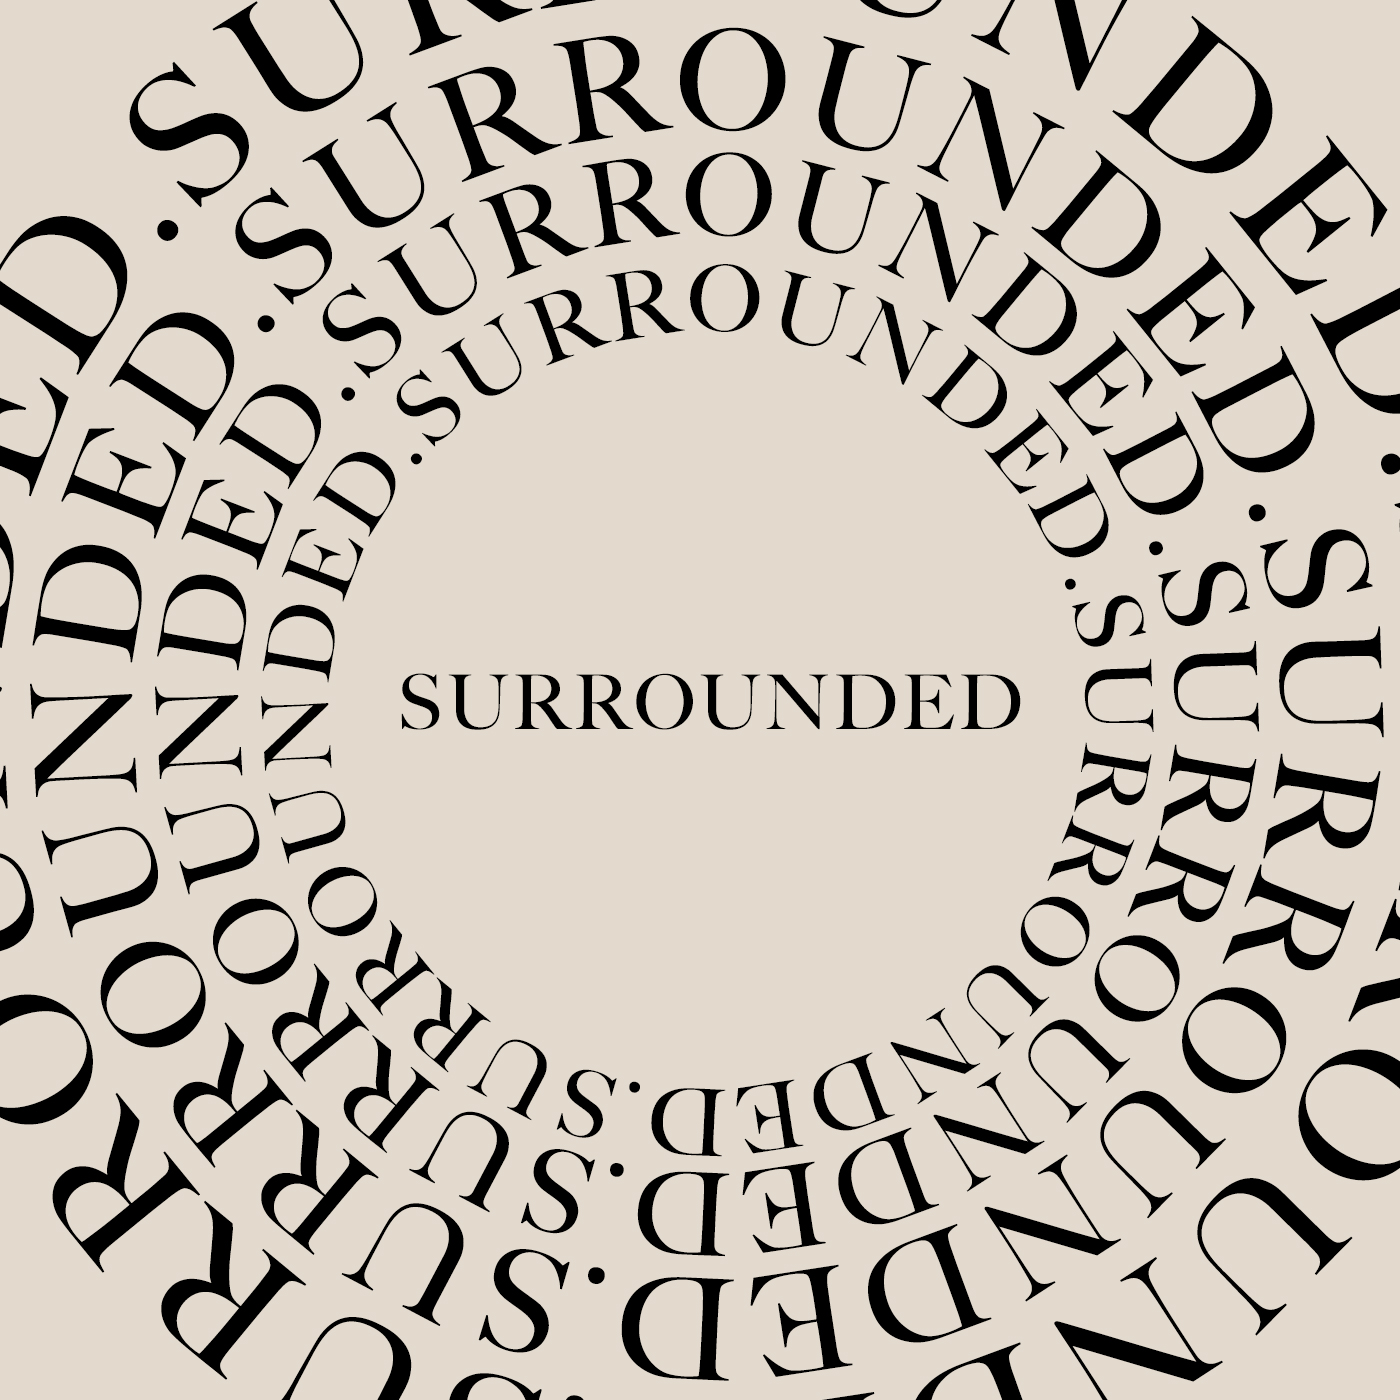 Surrounded Pt1: Andre Greeff AM